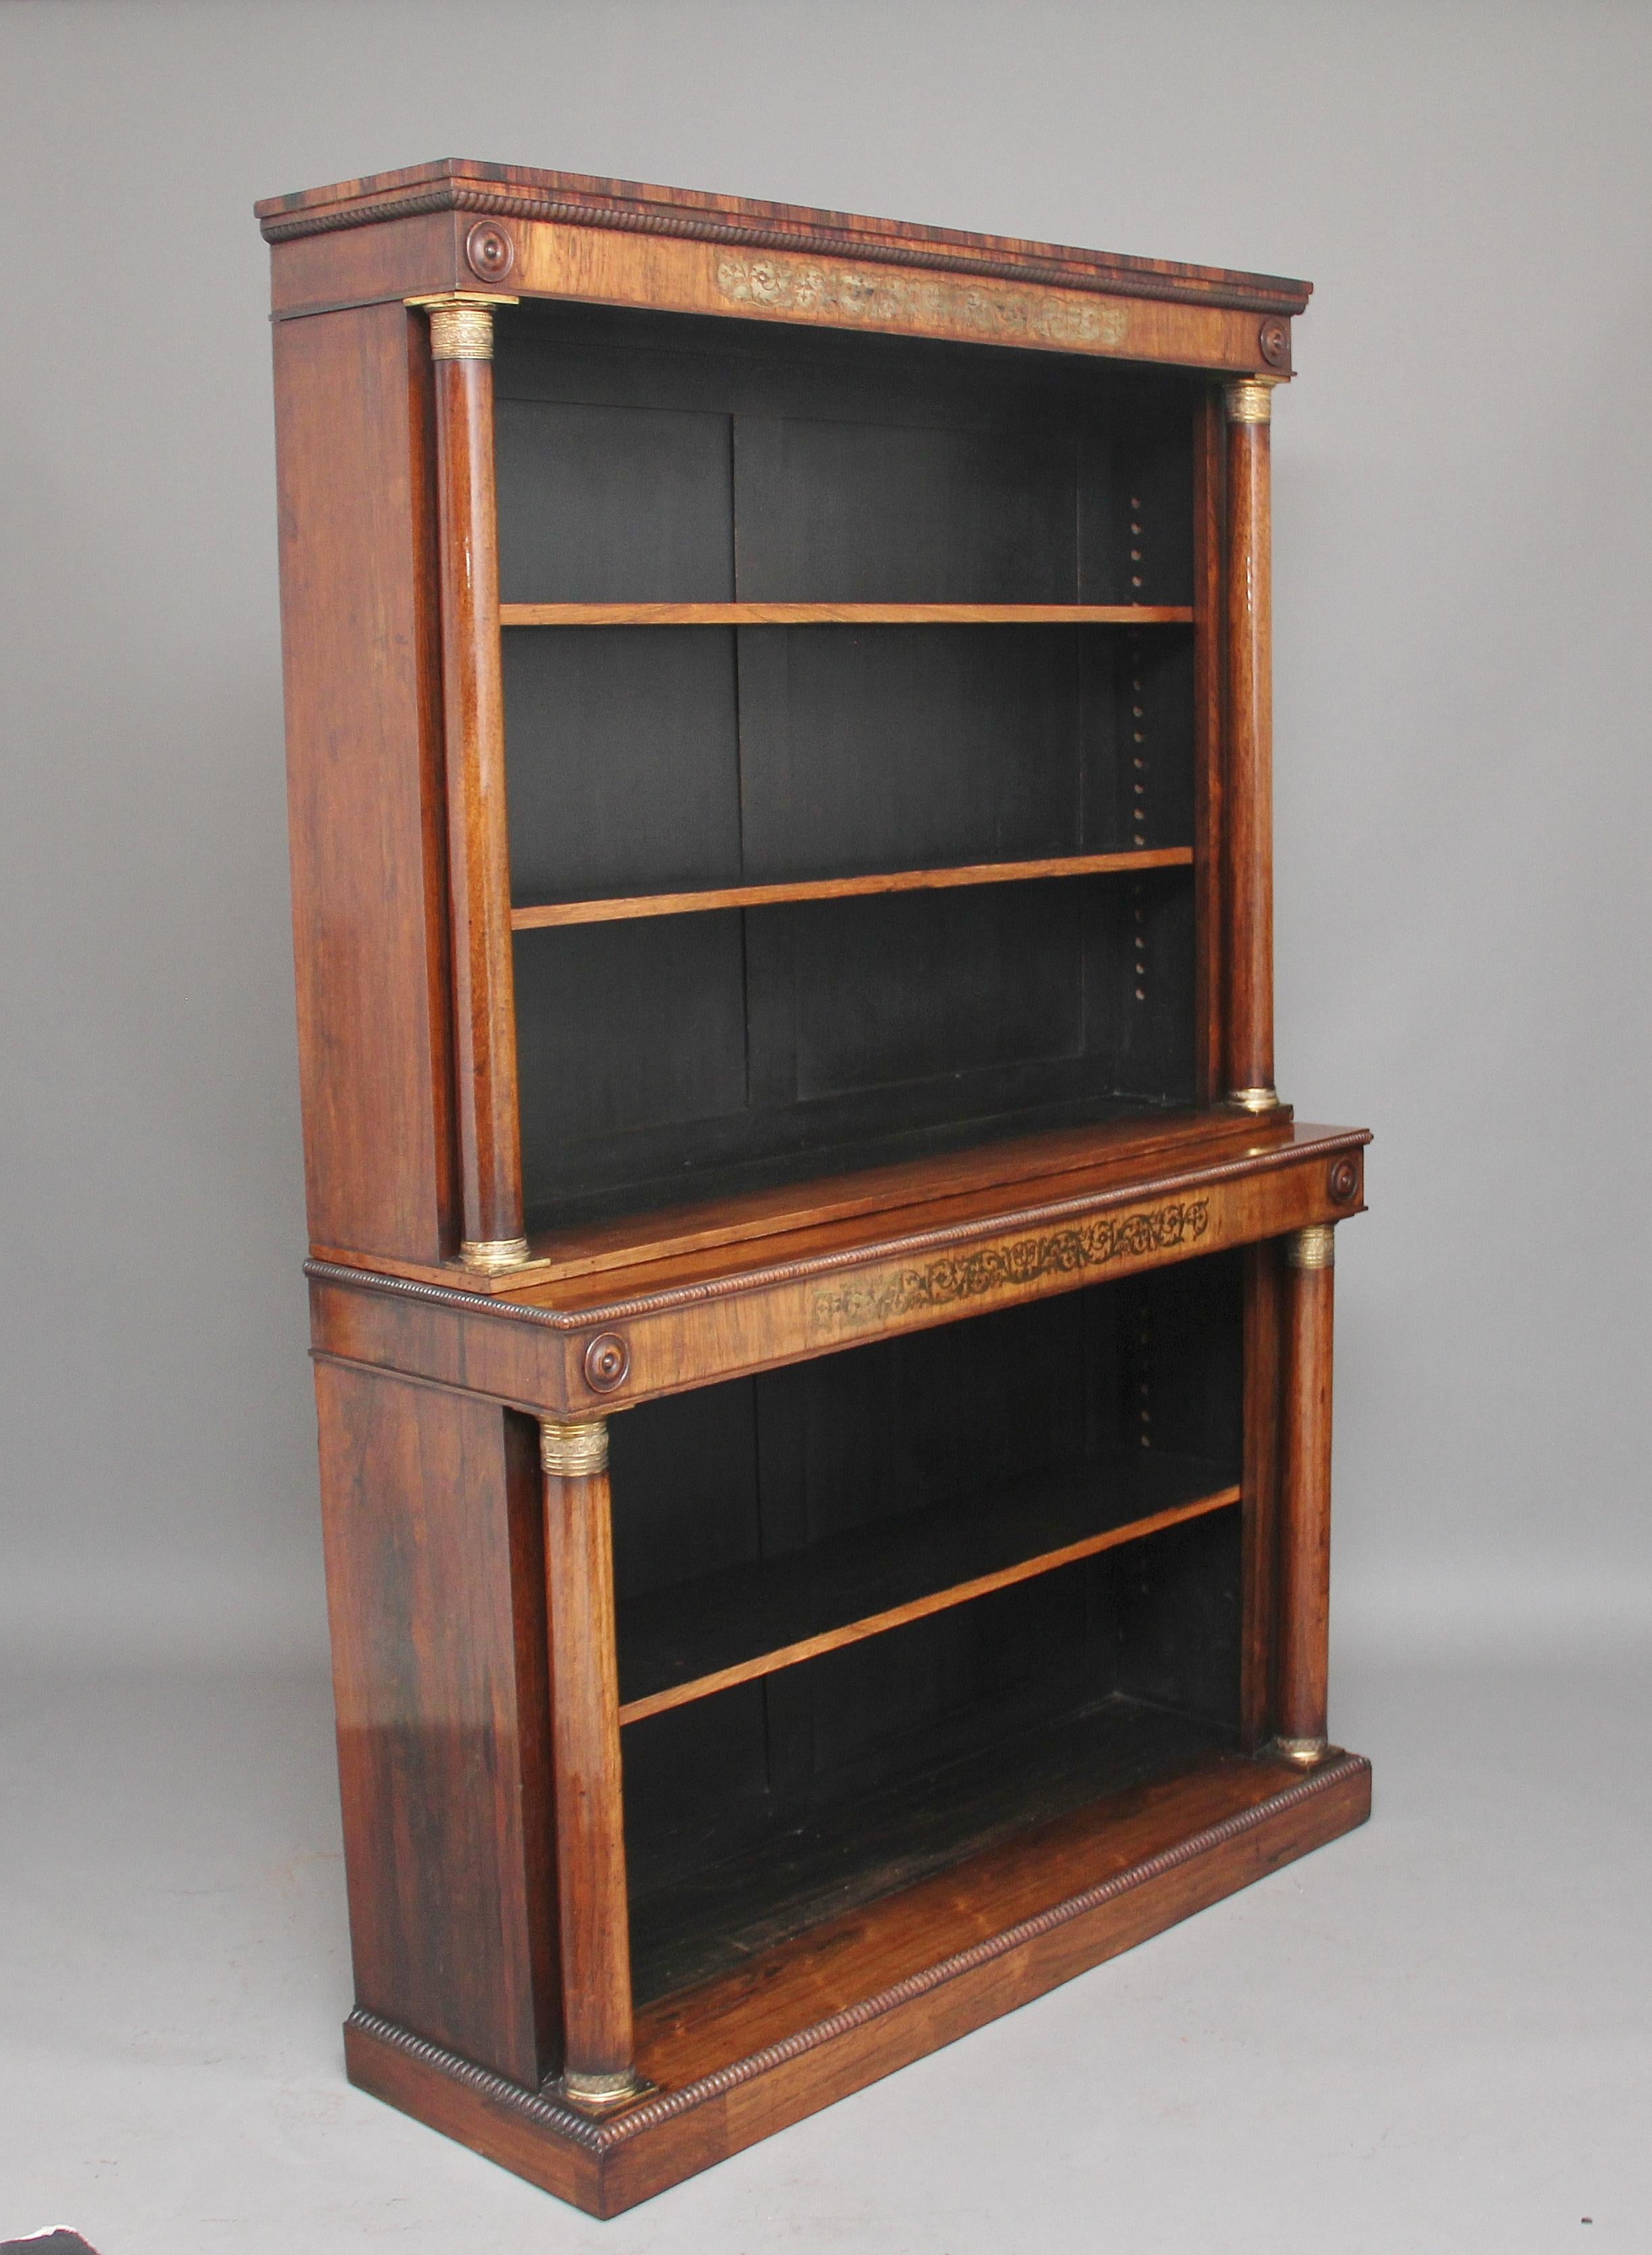 English Early 19th Century Rosewood and Brass Inlaid Bookcase